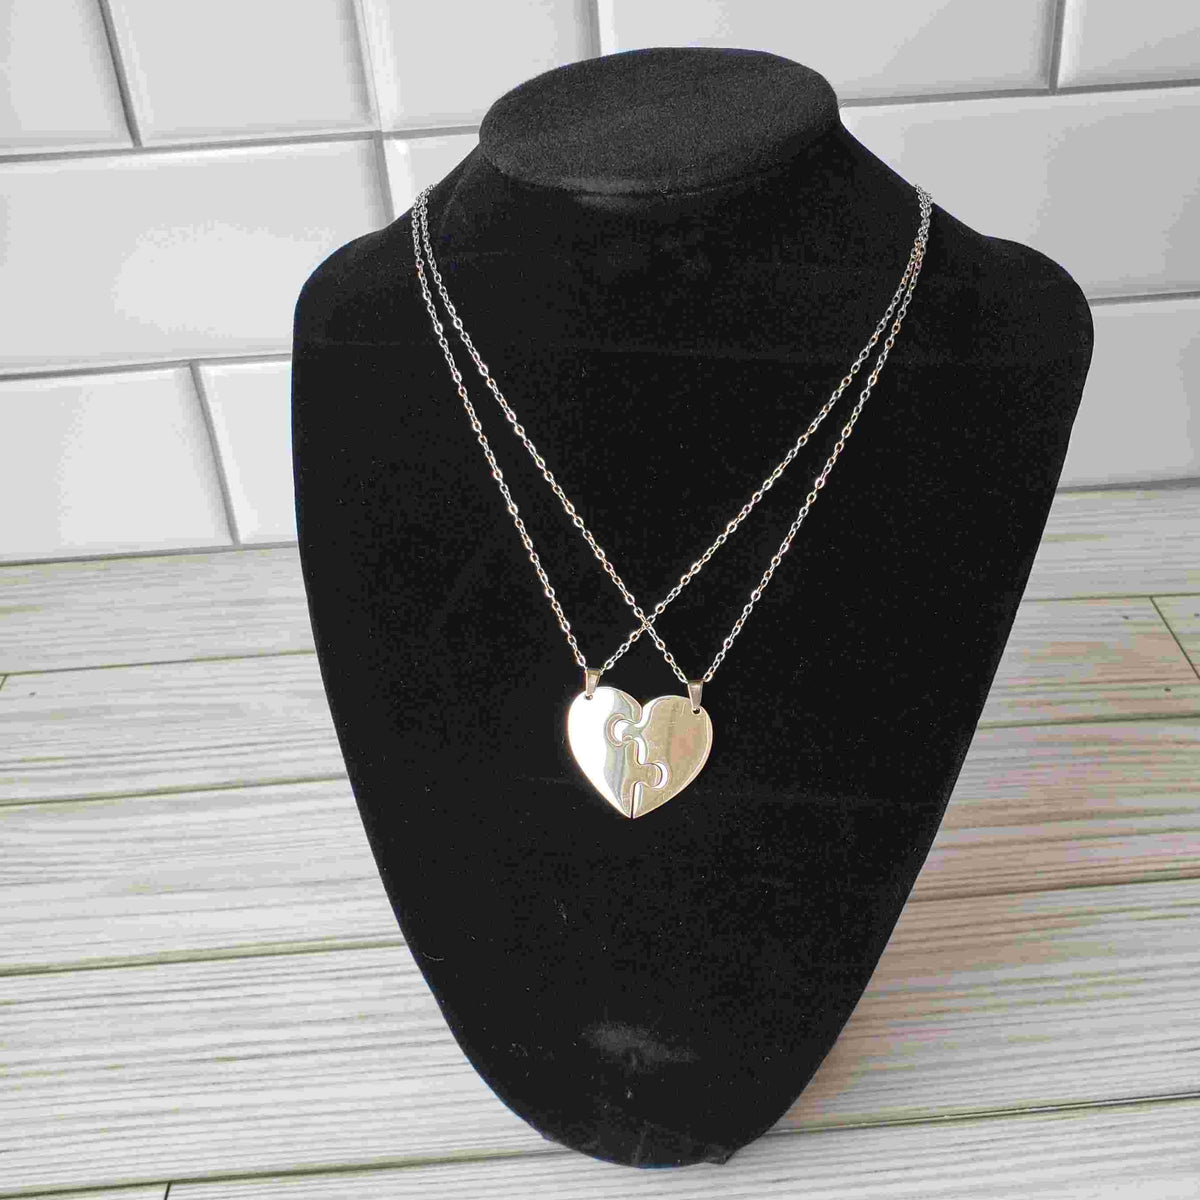 A mother's heart necklace with 2 pieces in silver.